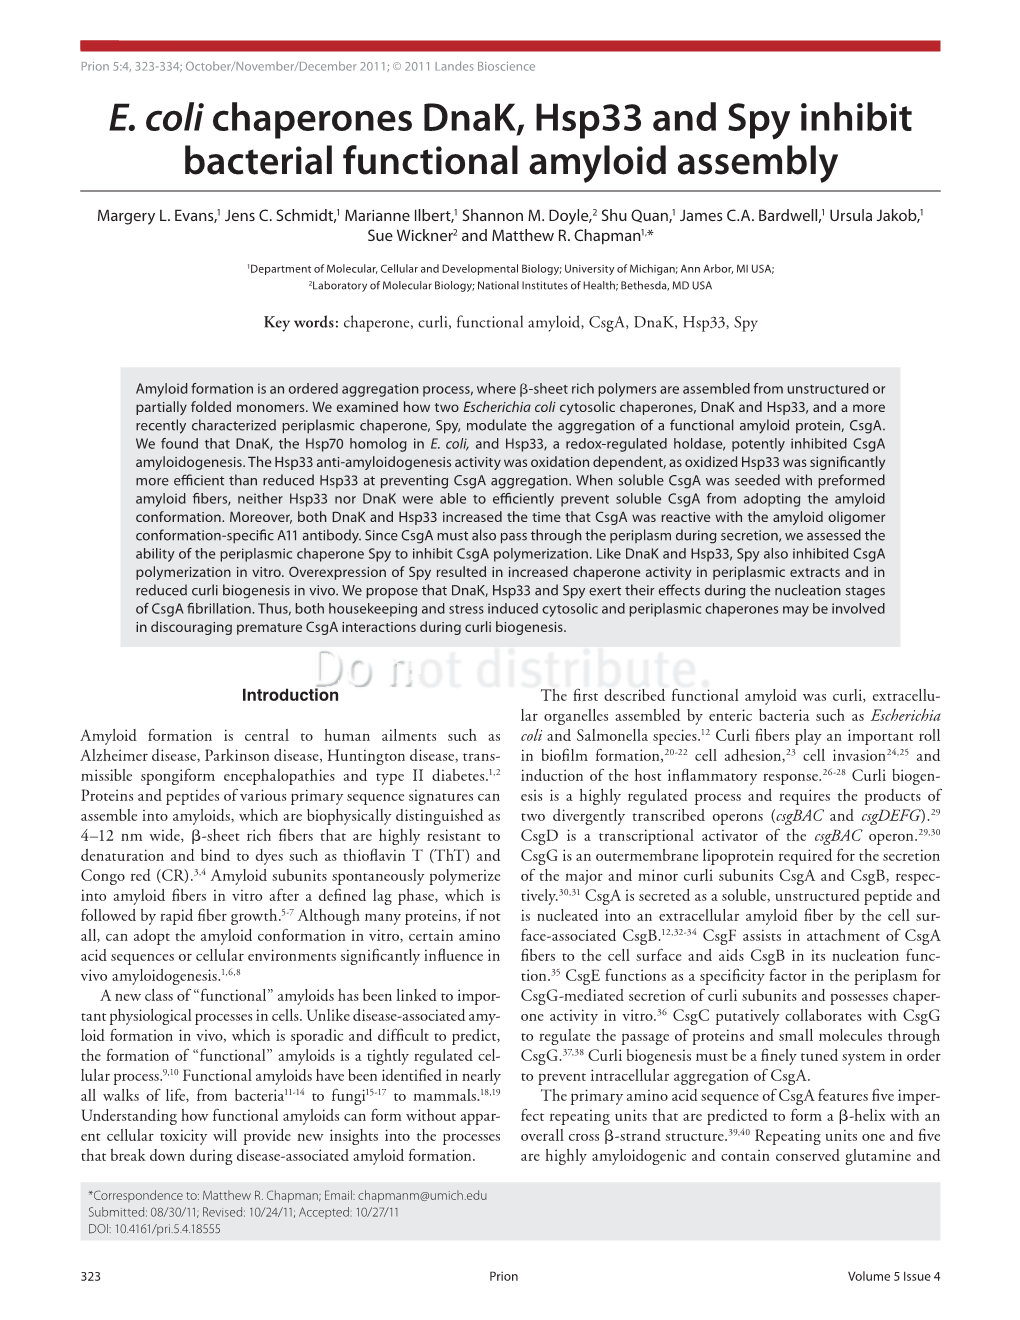 E. Coli Chaperones Dnak, Hsp33 and Spy Inhibit Bacterial Functional Amyloid Assembly